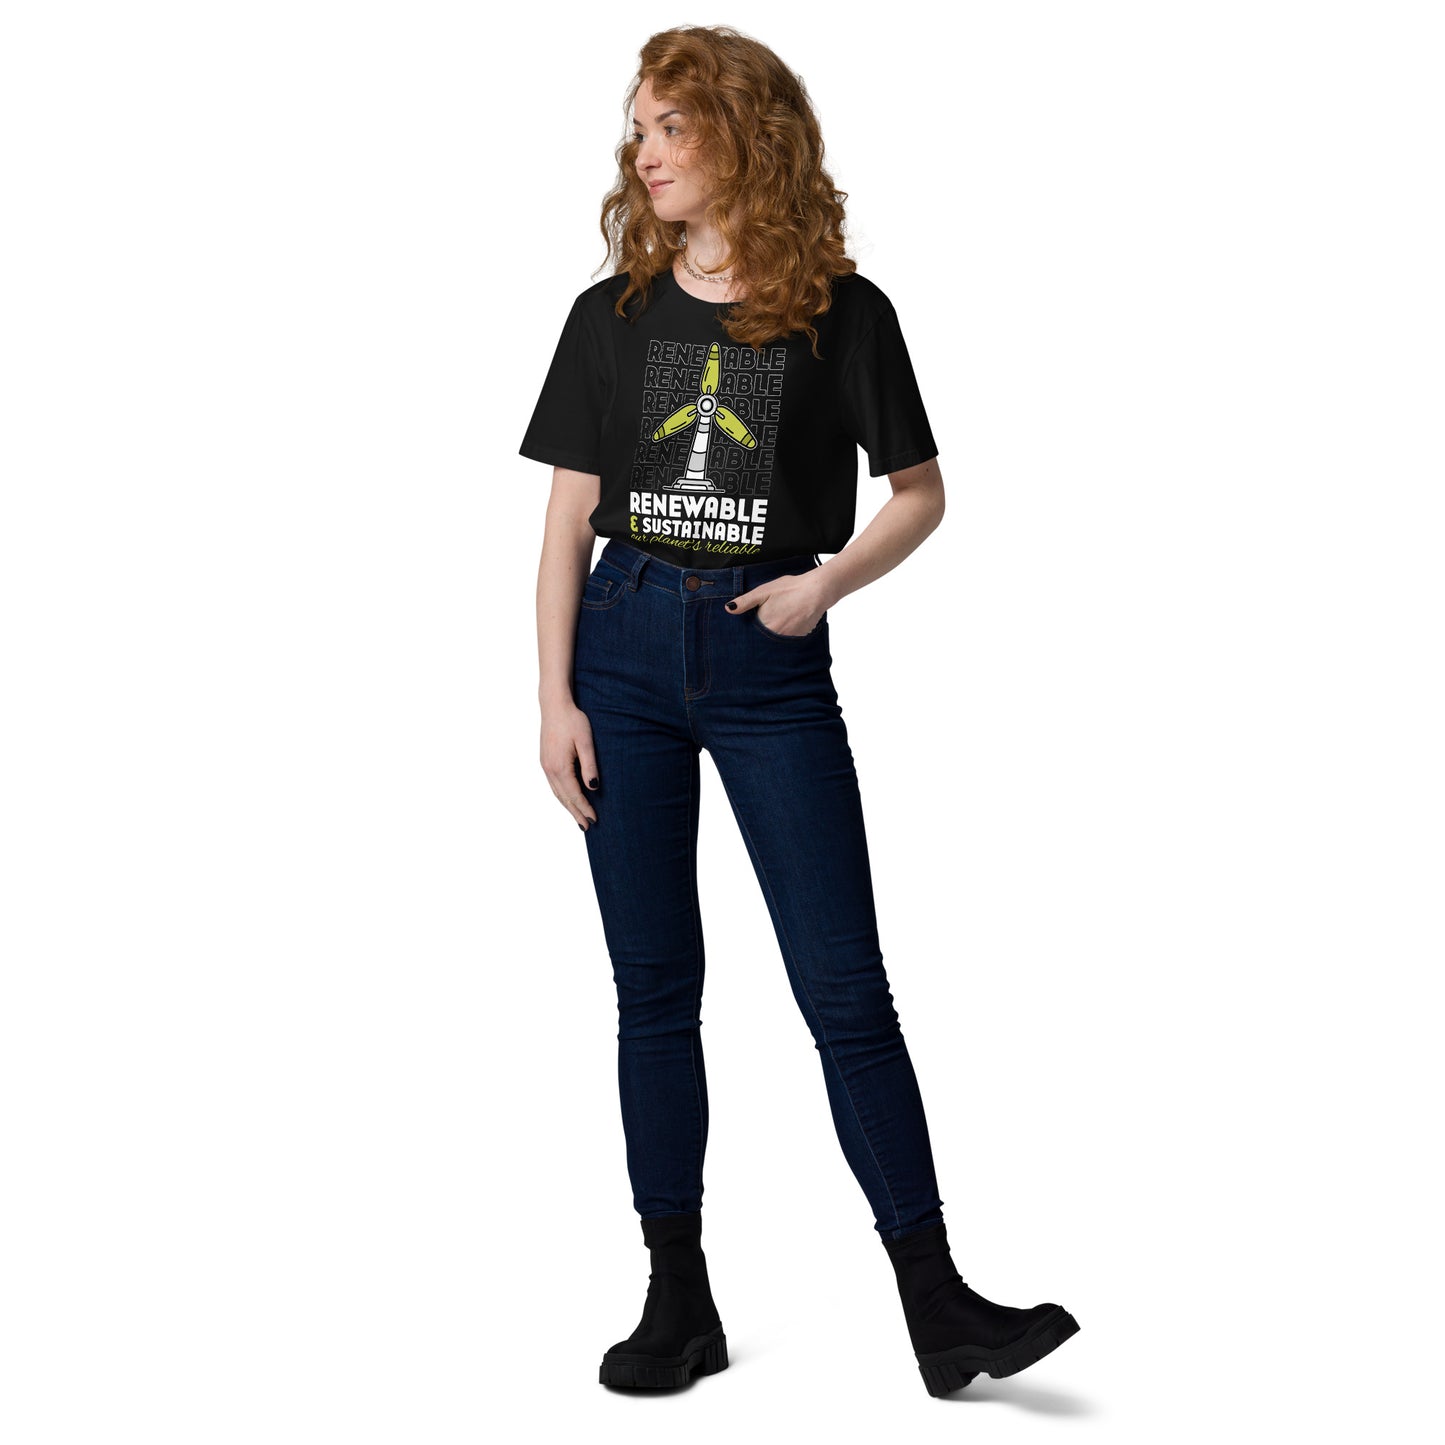 Renewable & Sustainable our planet´s reliable Bio-Baumwoll-T-Shirt